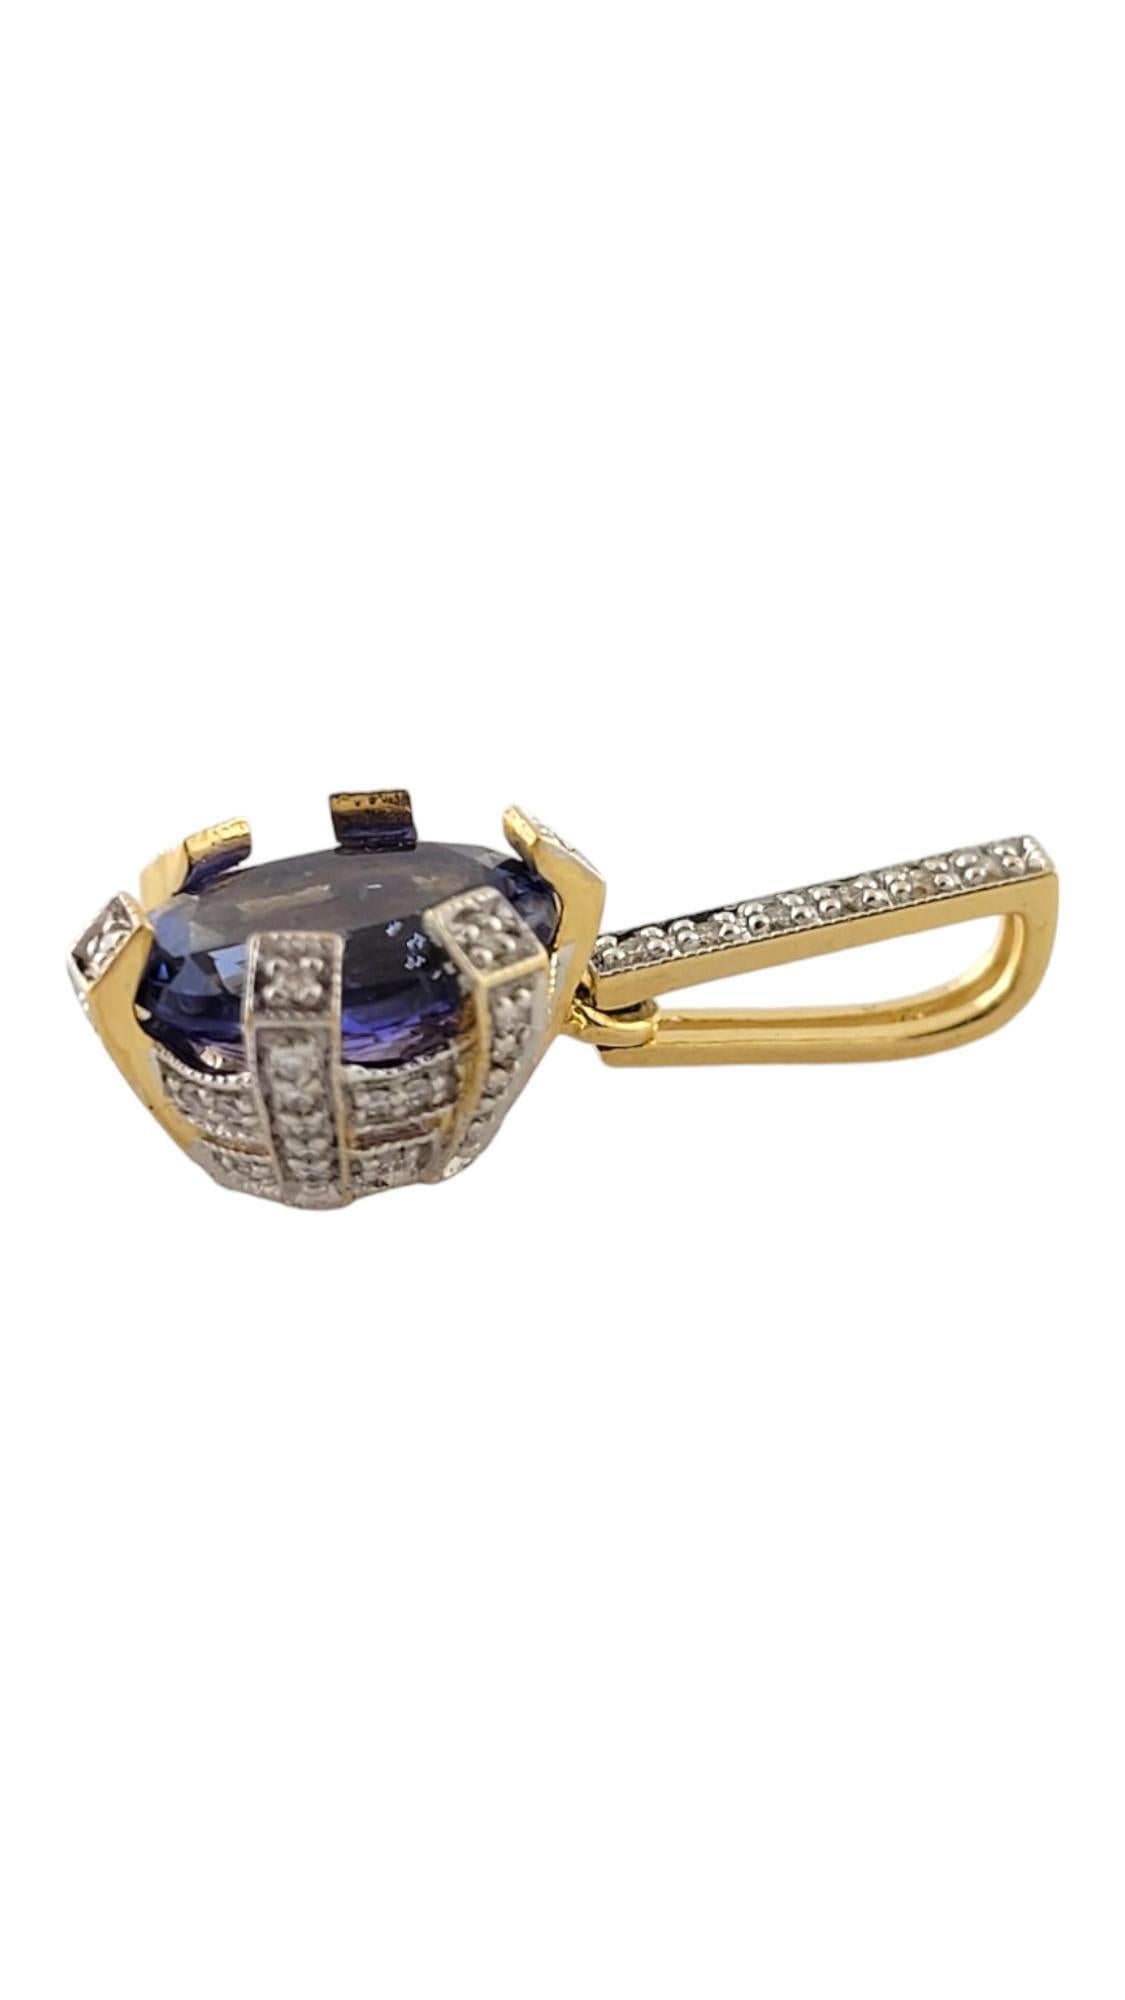 18 Karat Yellow Gold Tanzanite and Diamond Pendant-

This stunning 18K yellow gold pendant features one oval tanzanite (11 mm x 9 mm) and 58 round brilliant cut diamonds set in an elegant basket setting and on bale.

Oval Tanzanite is 2.58 cts.,